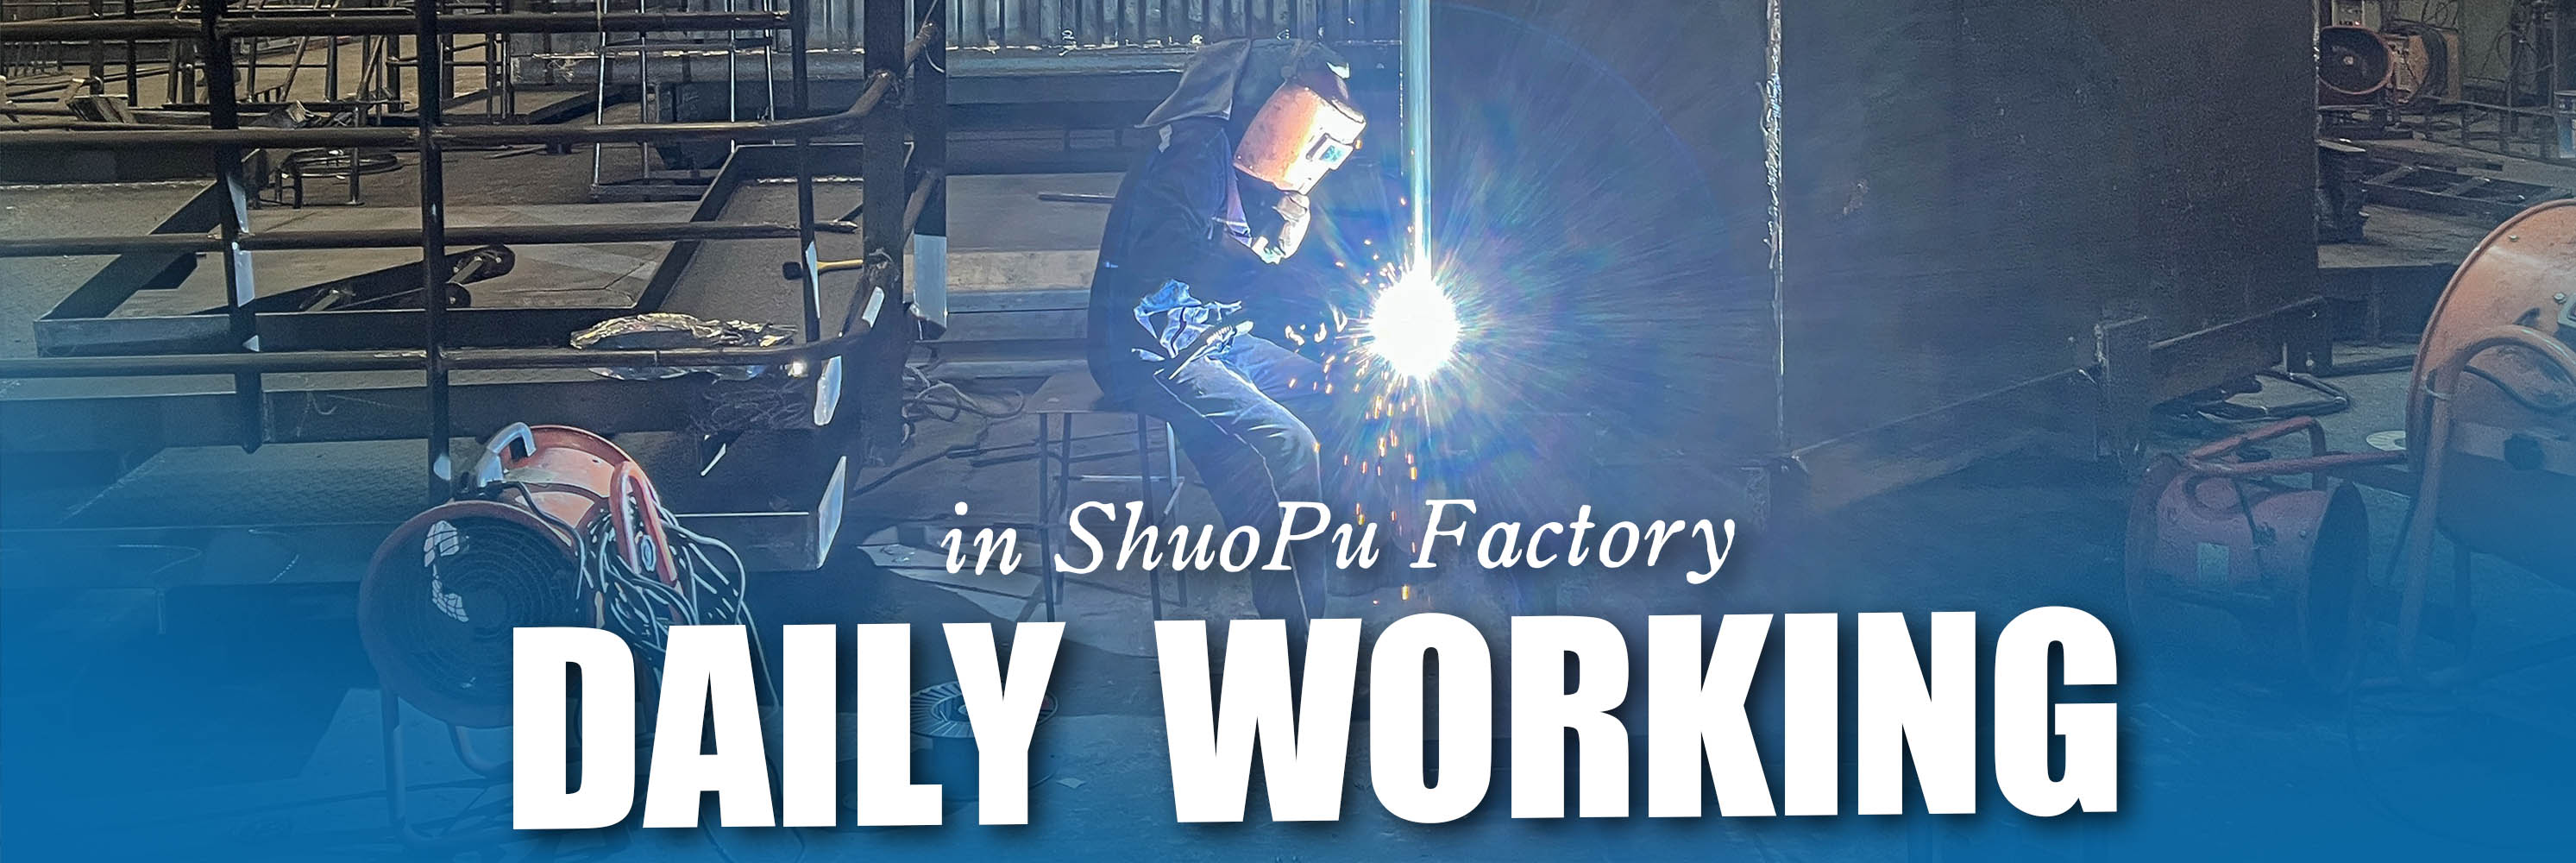 Daily Work in ShuoPu Factory: Production Never Stops!